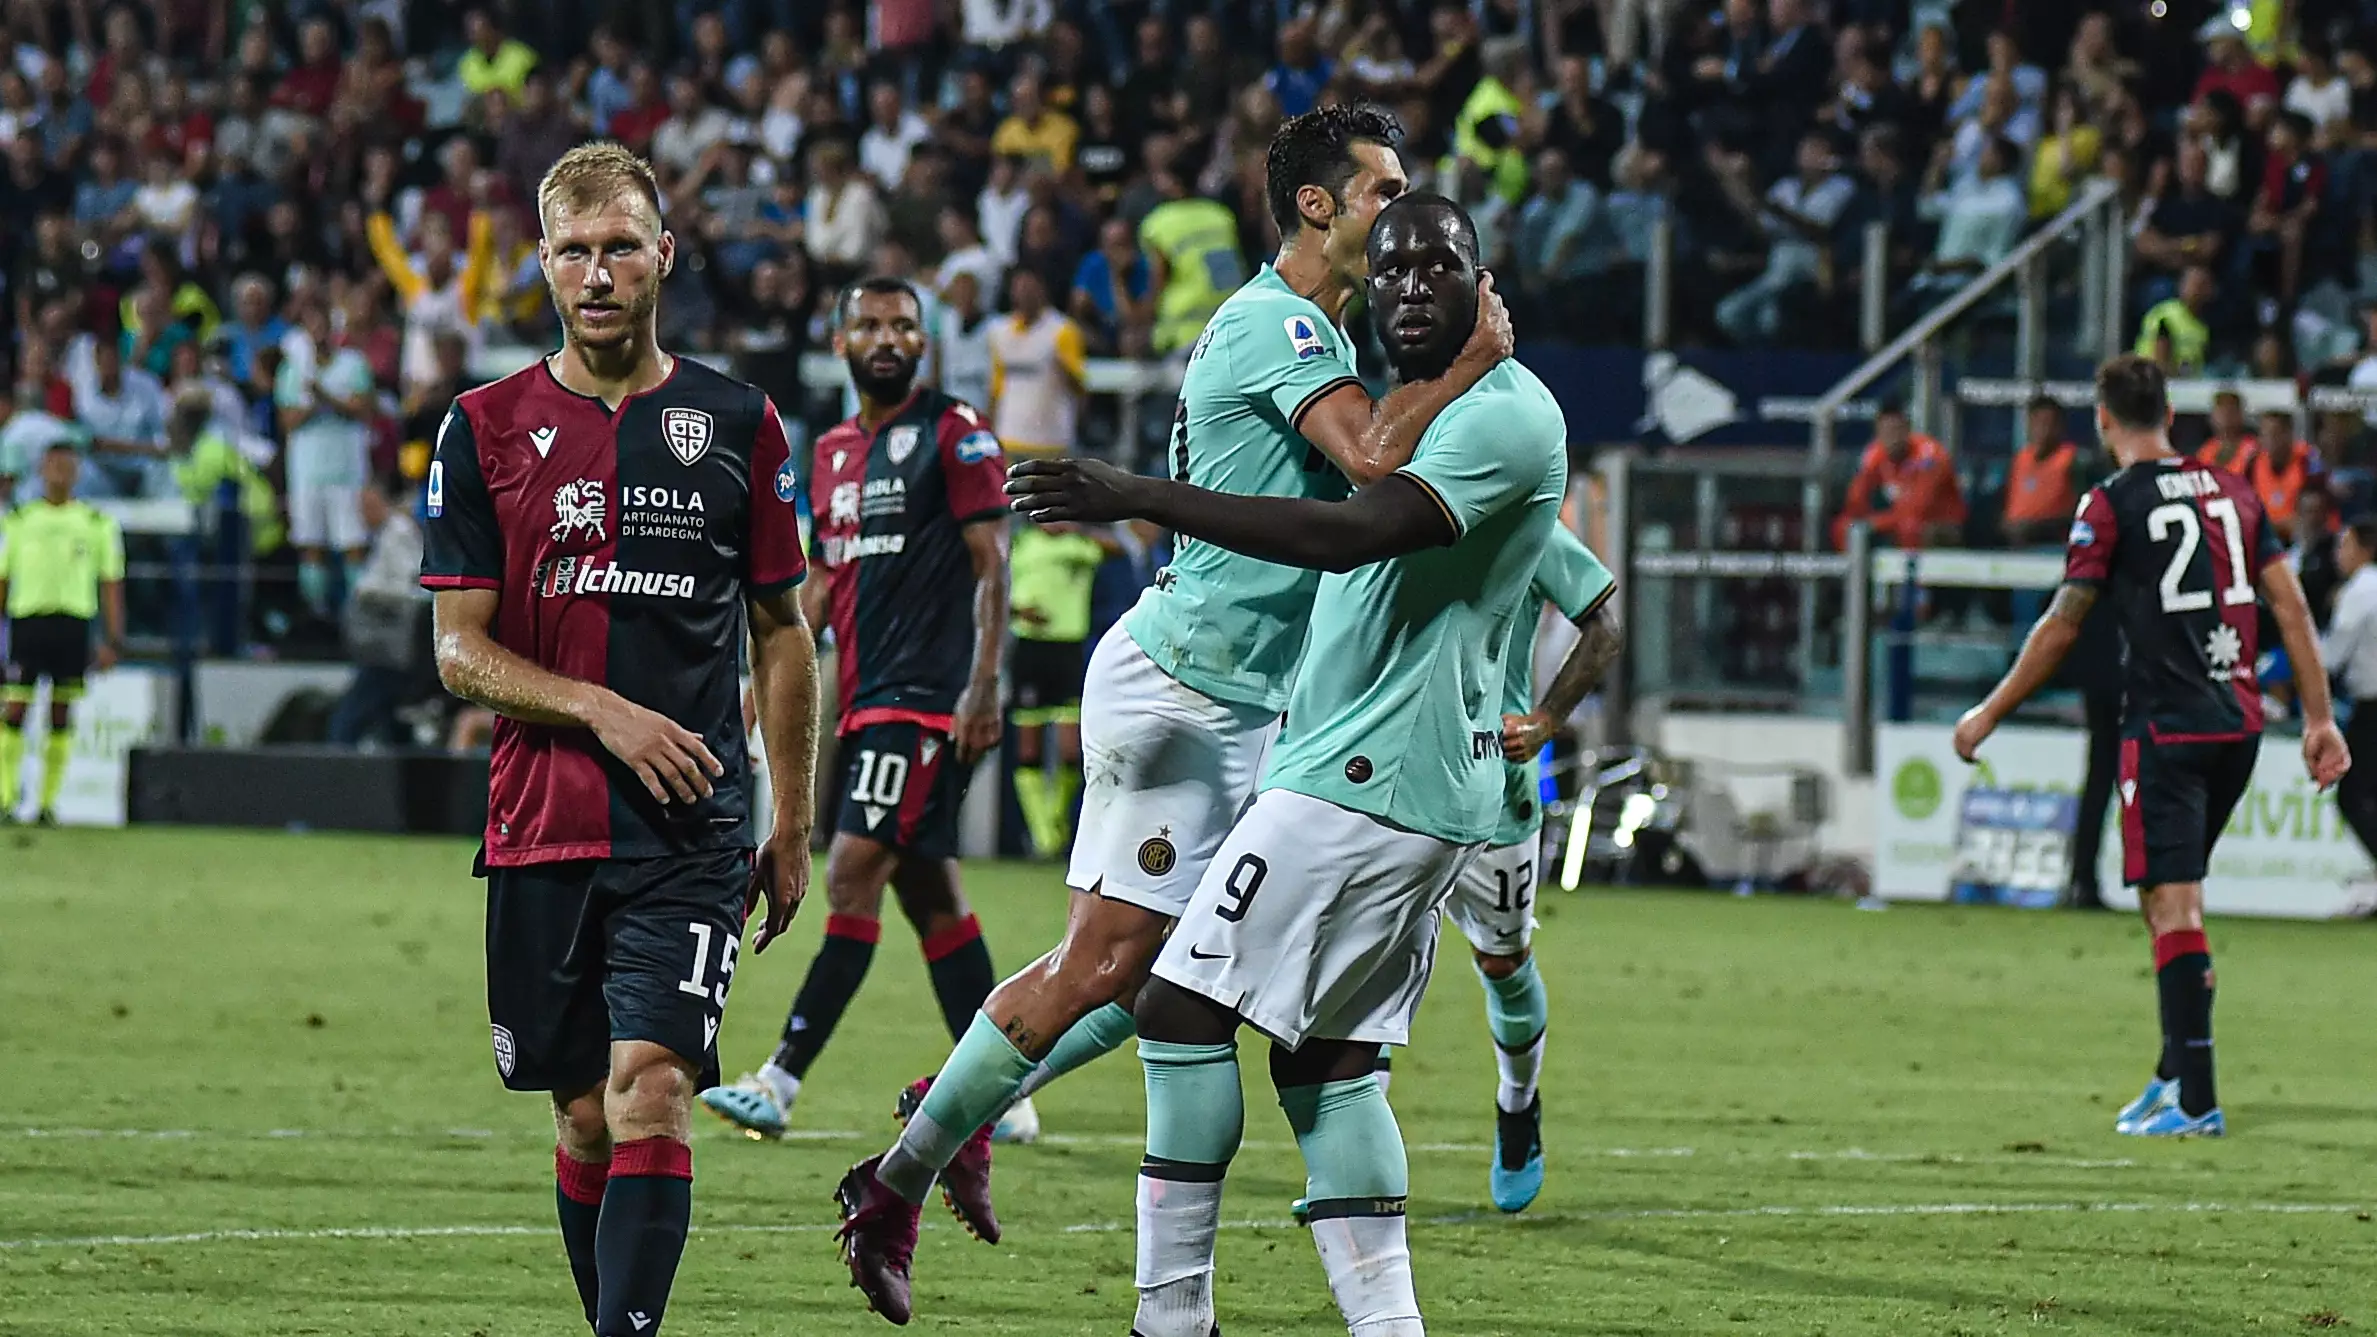 Serie A Confirm Cagliari Will Not Face Punishment For The Racist Chanting Aimed At Romelu Lukaku